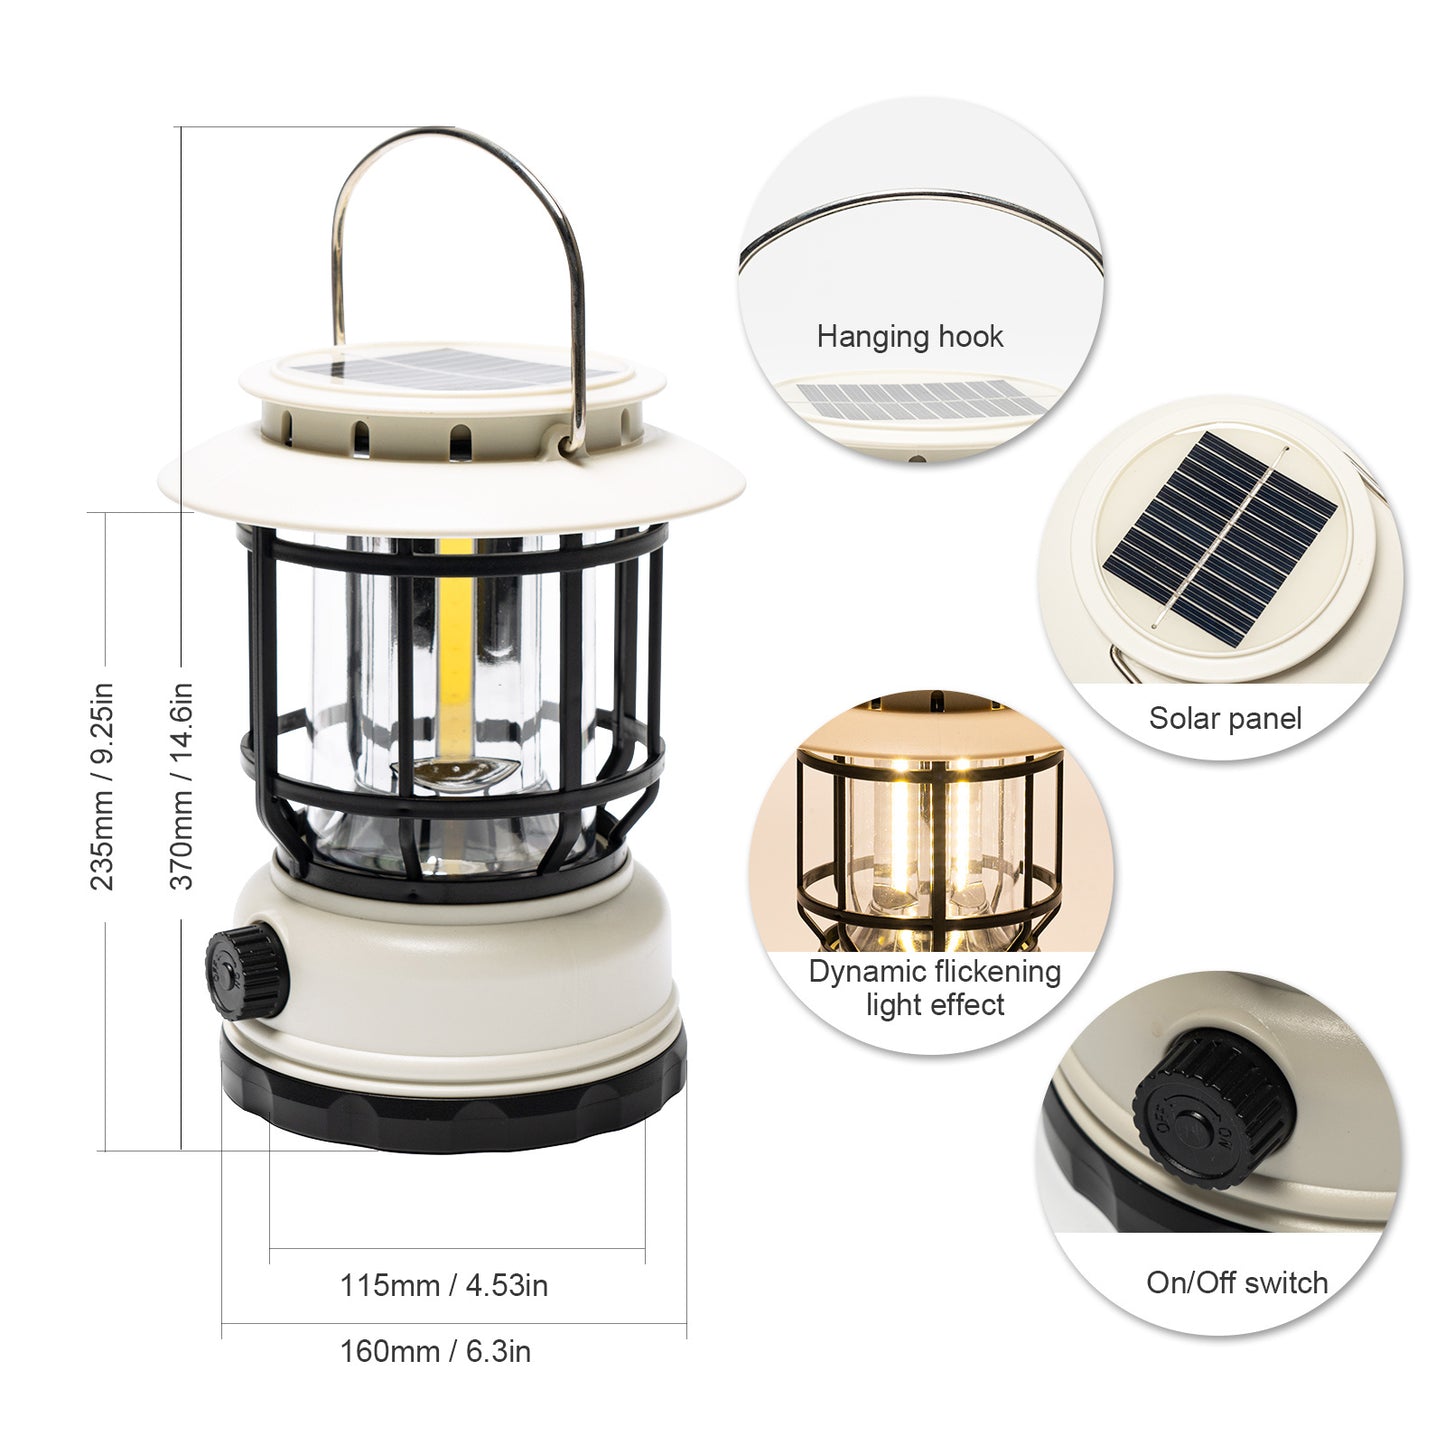 Wanjo Solar Camping Lantern for Outdoor, Vintage Decorative Retro Horse Lamp with Multifunctional Whistle, Eco-Friendly Garden Light,Rechargeable Camping Lights, Portable Gear for Camping Travel